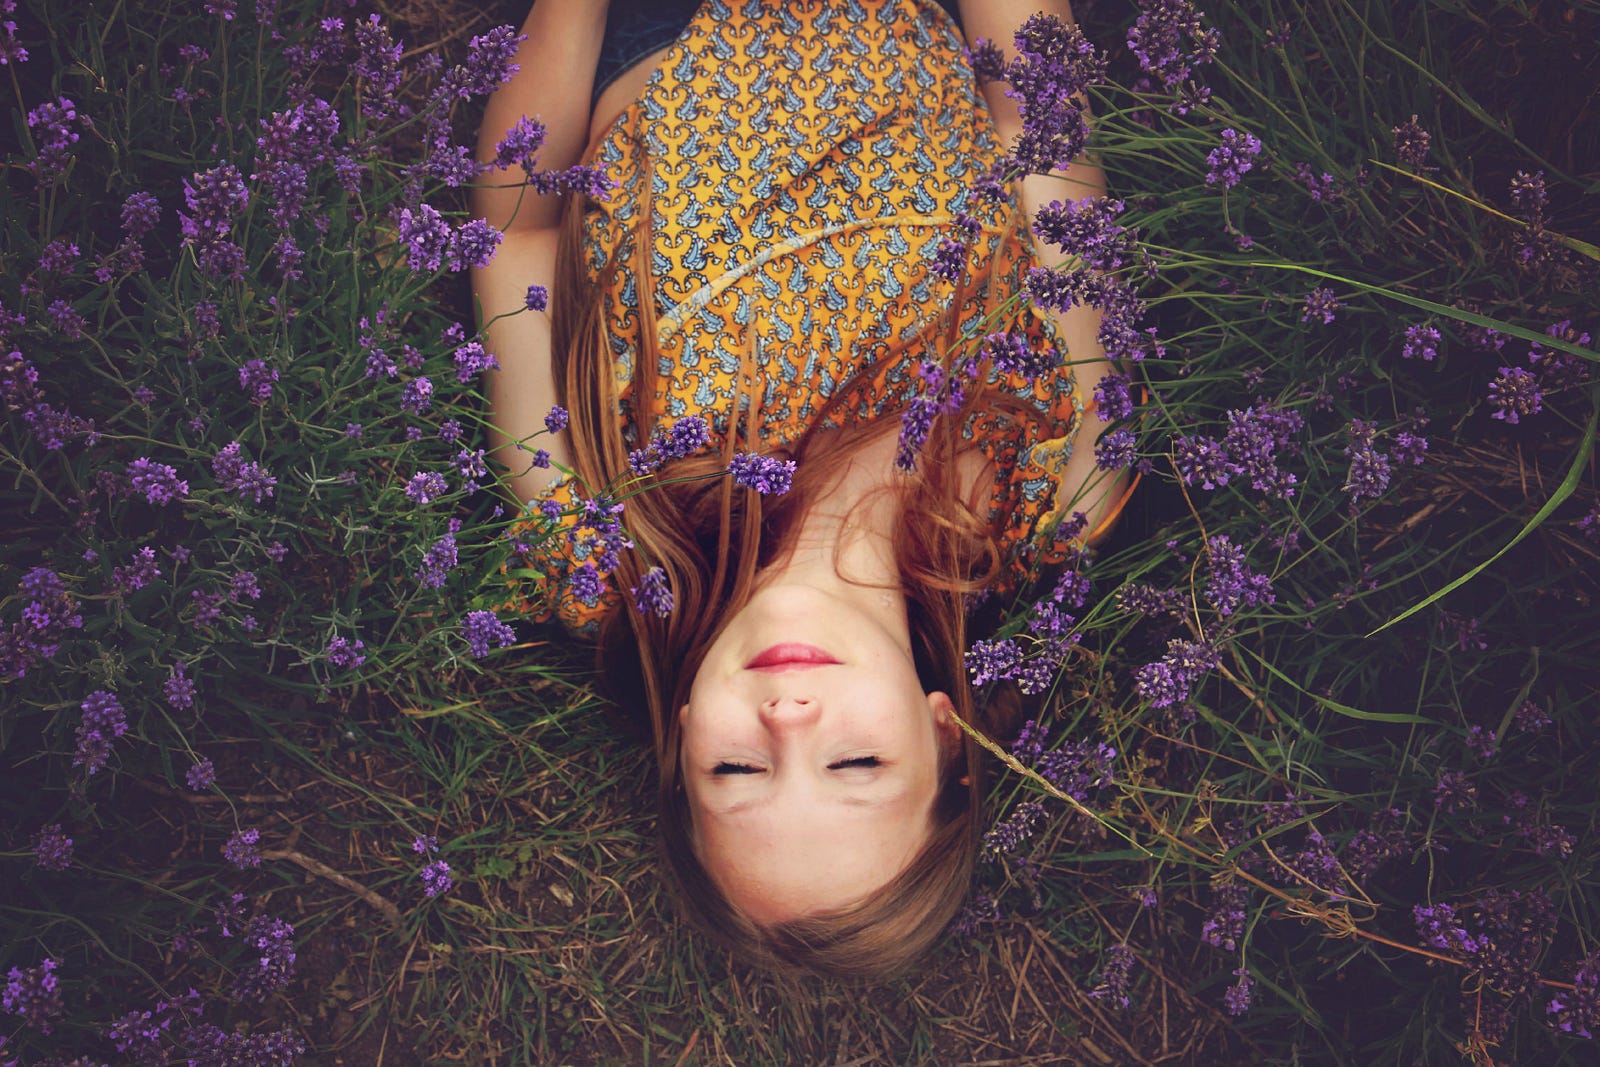 A young woman is upside down in the image. Her eyes are closed as she lies ina field of purple flowers. In a recent study, those regularly consuming excessive dietary fat and sugar (junk food) experienced disruptions in their brain’s slow-wave sleep patterns.